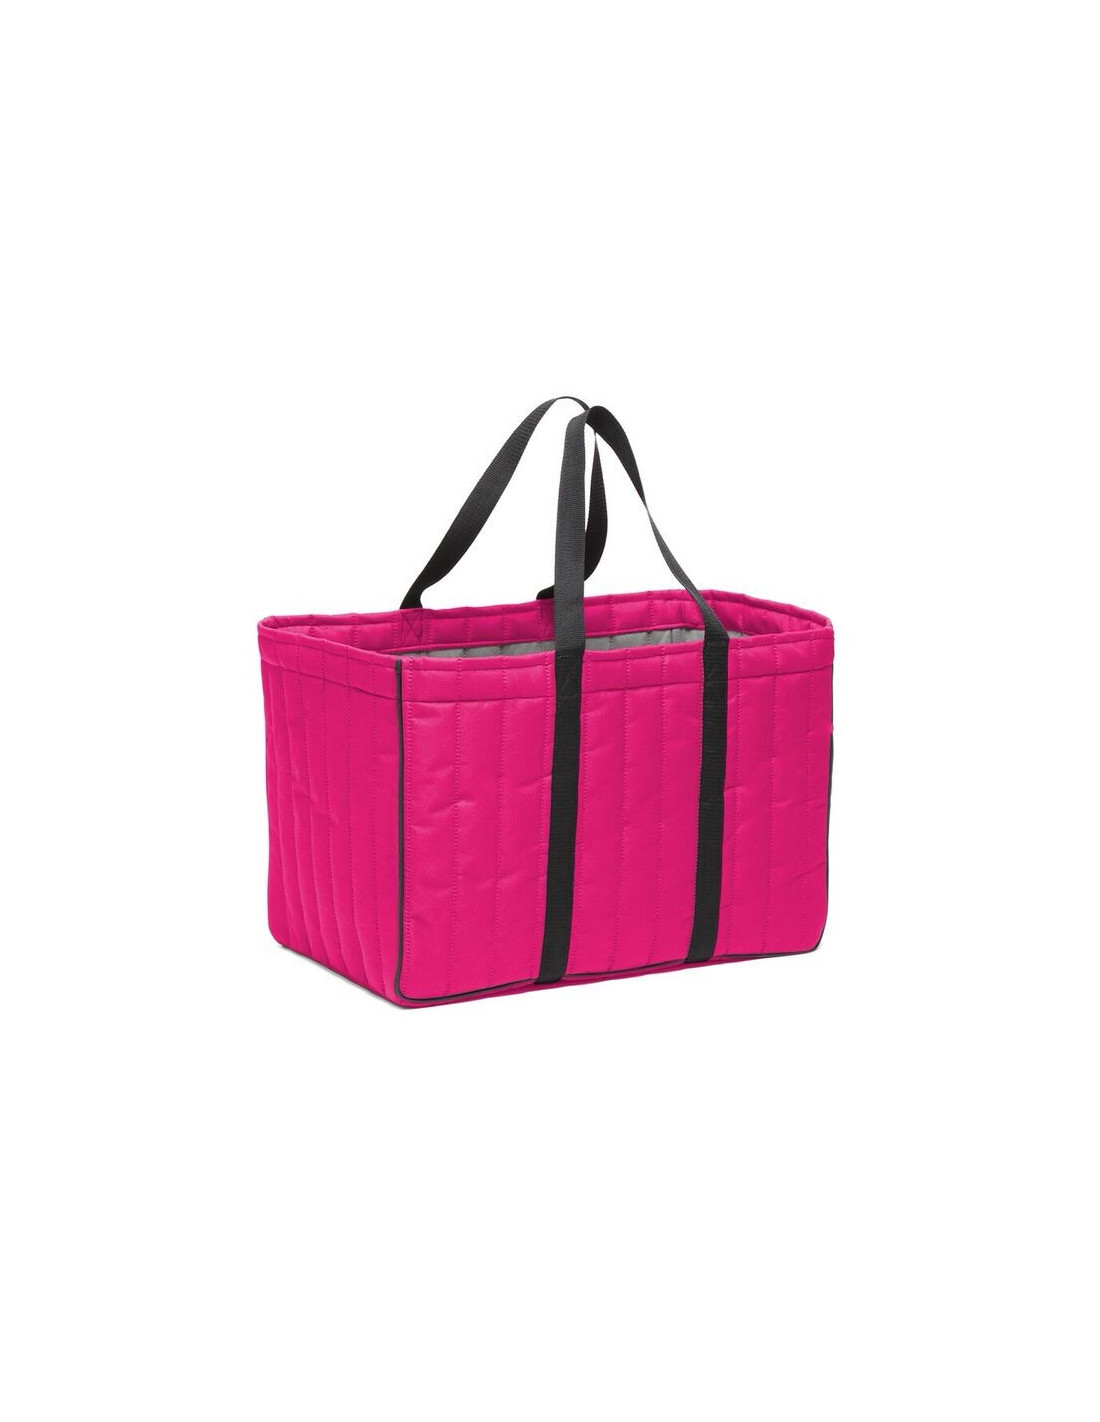 https://www.jarditop.fr/1298-thickbox_default/grand-sac-cabas-rose-courses-shopping-et-drive.jpg